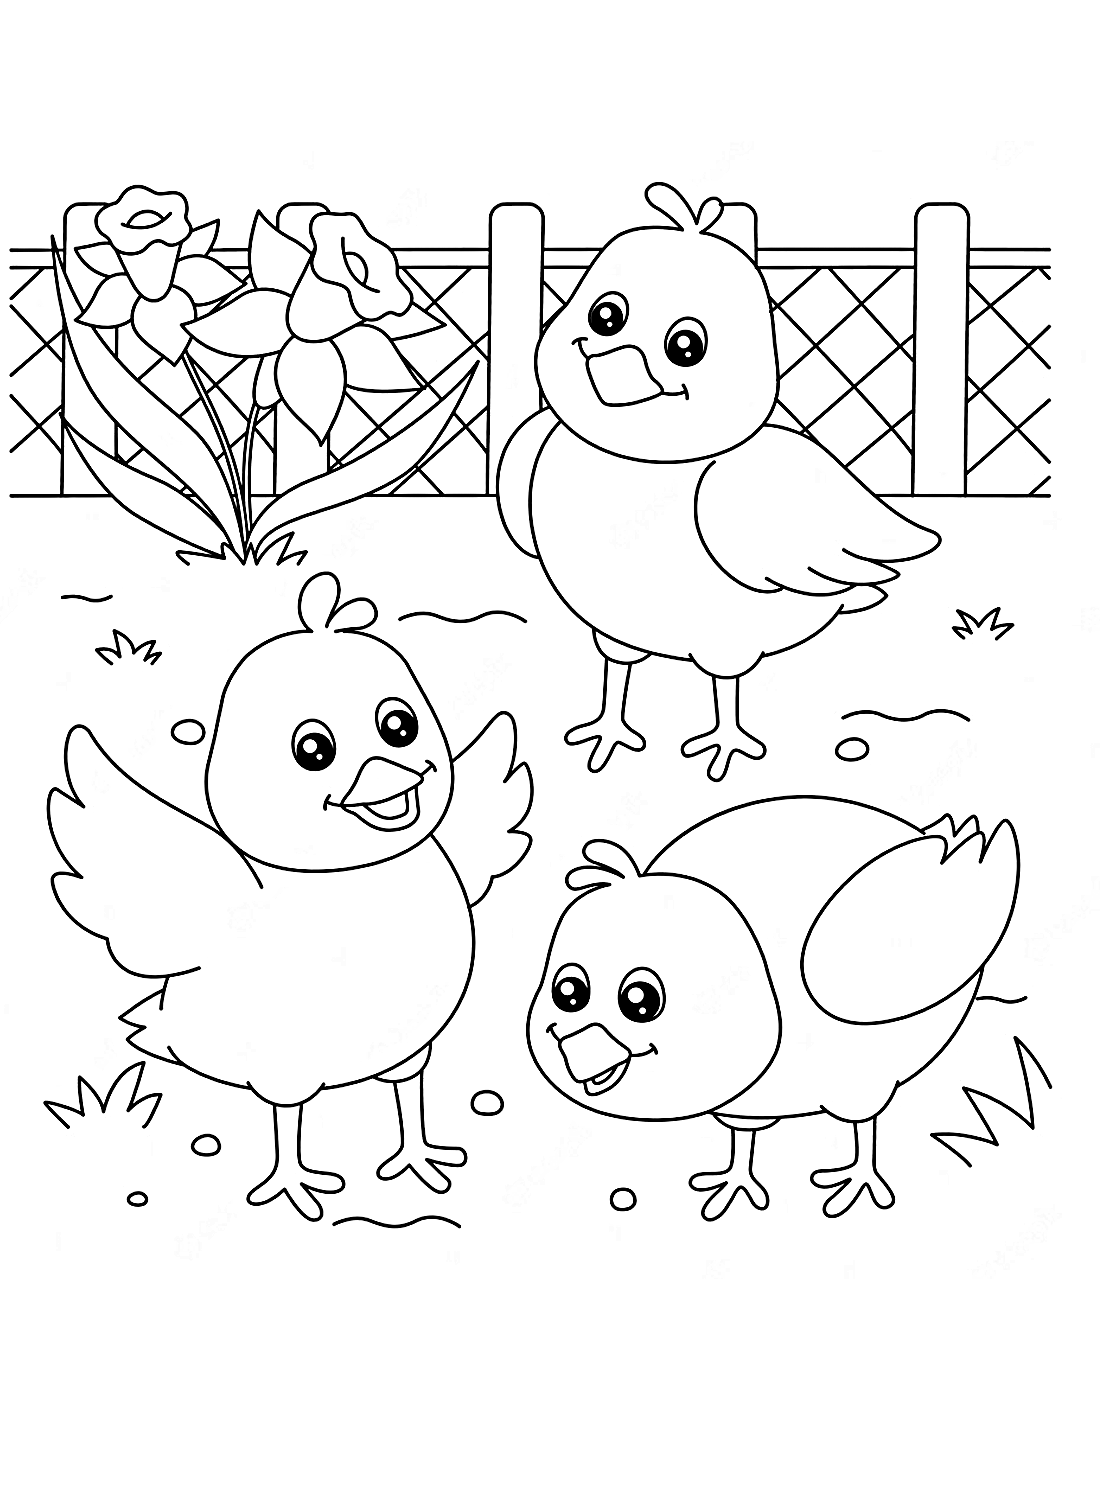 Chicks in the garden Coloring Pages